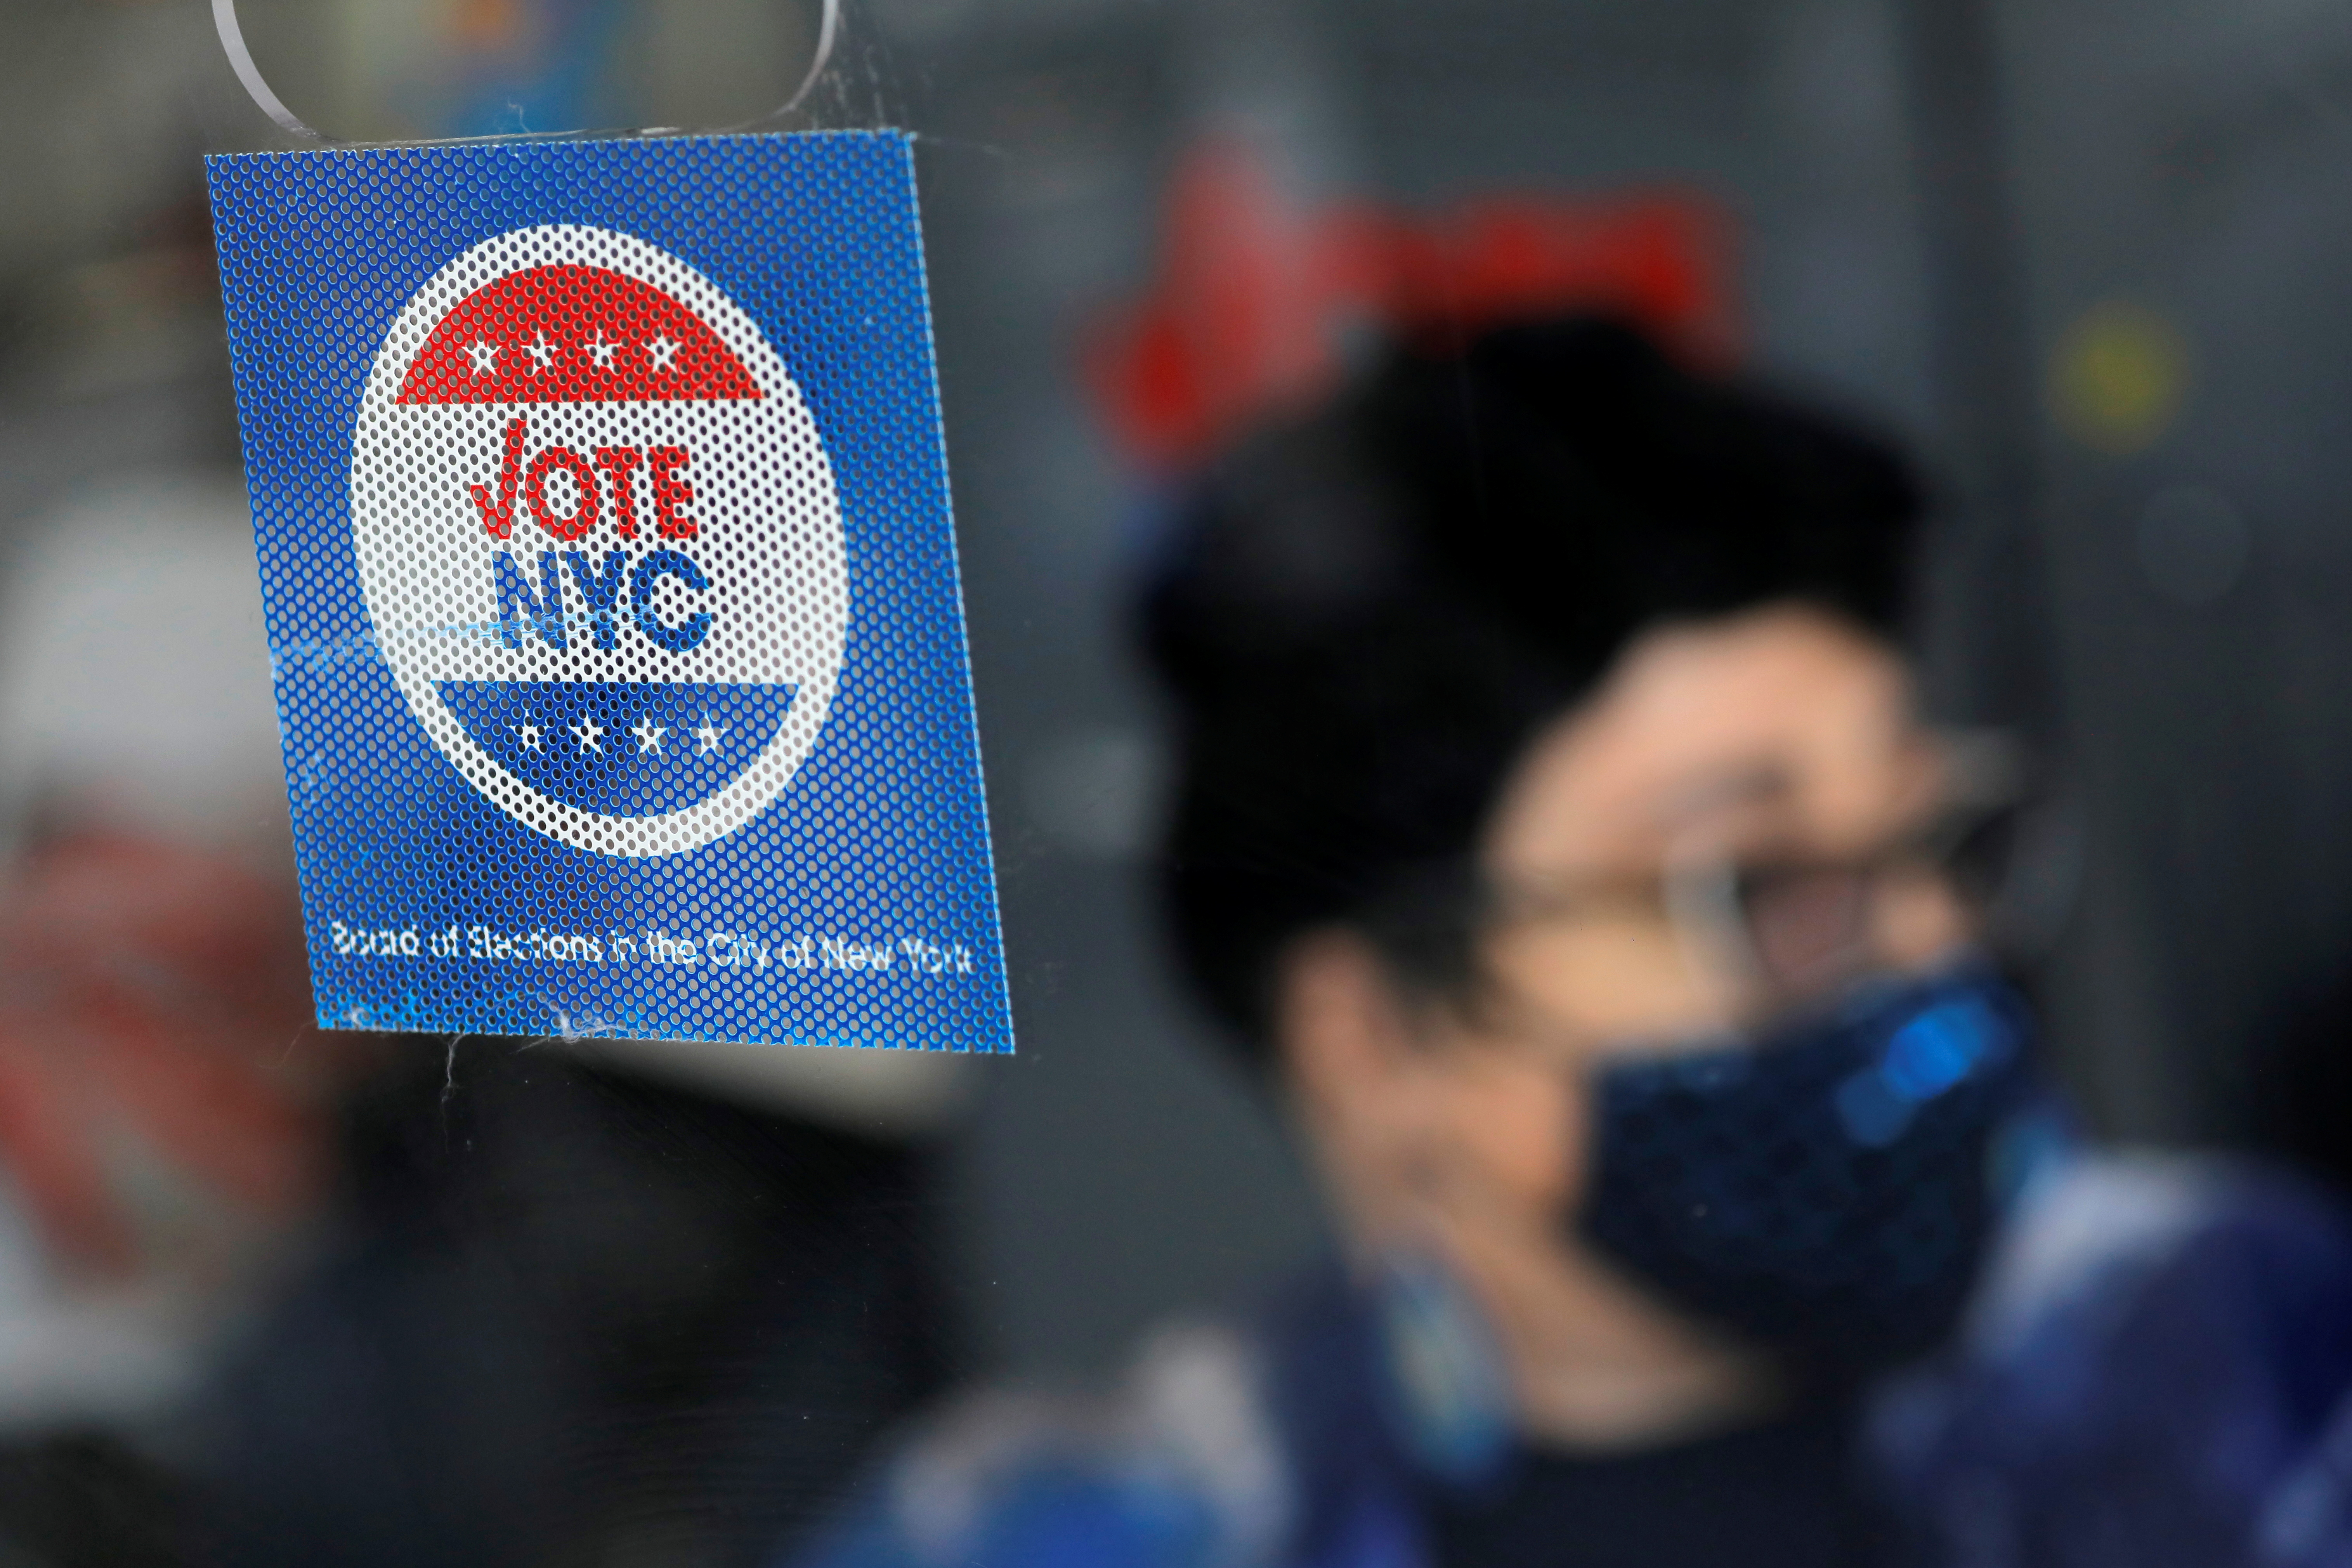 Signage is seen at an early voting location ahead of the New York City mayoral election in Harlem, New York City